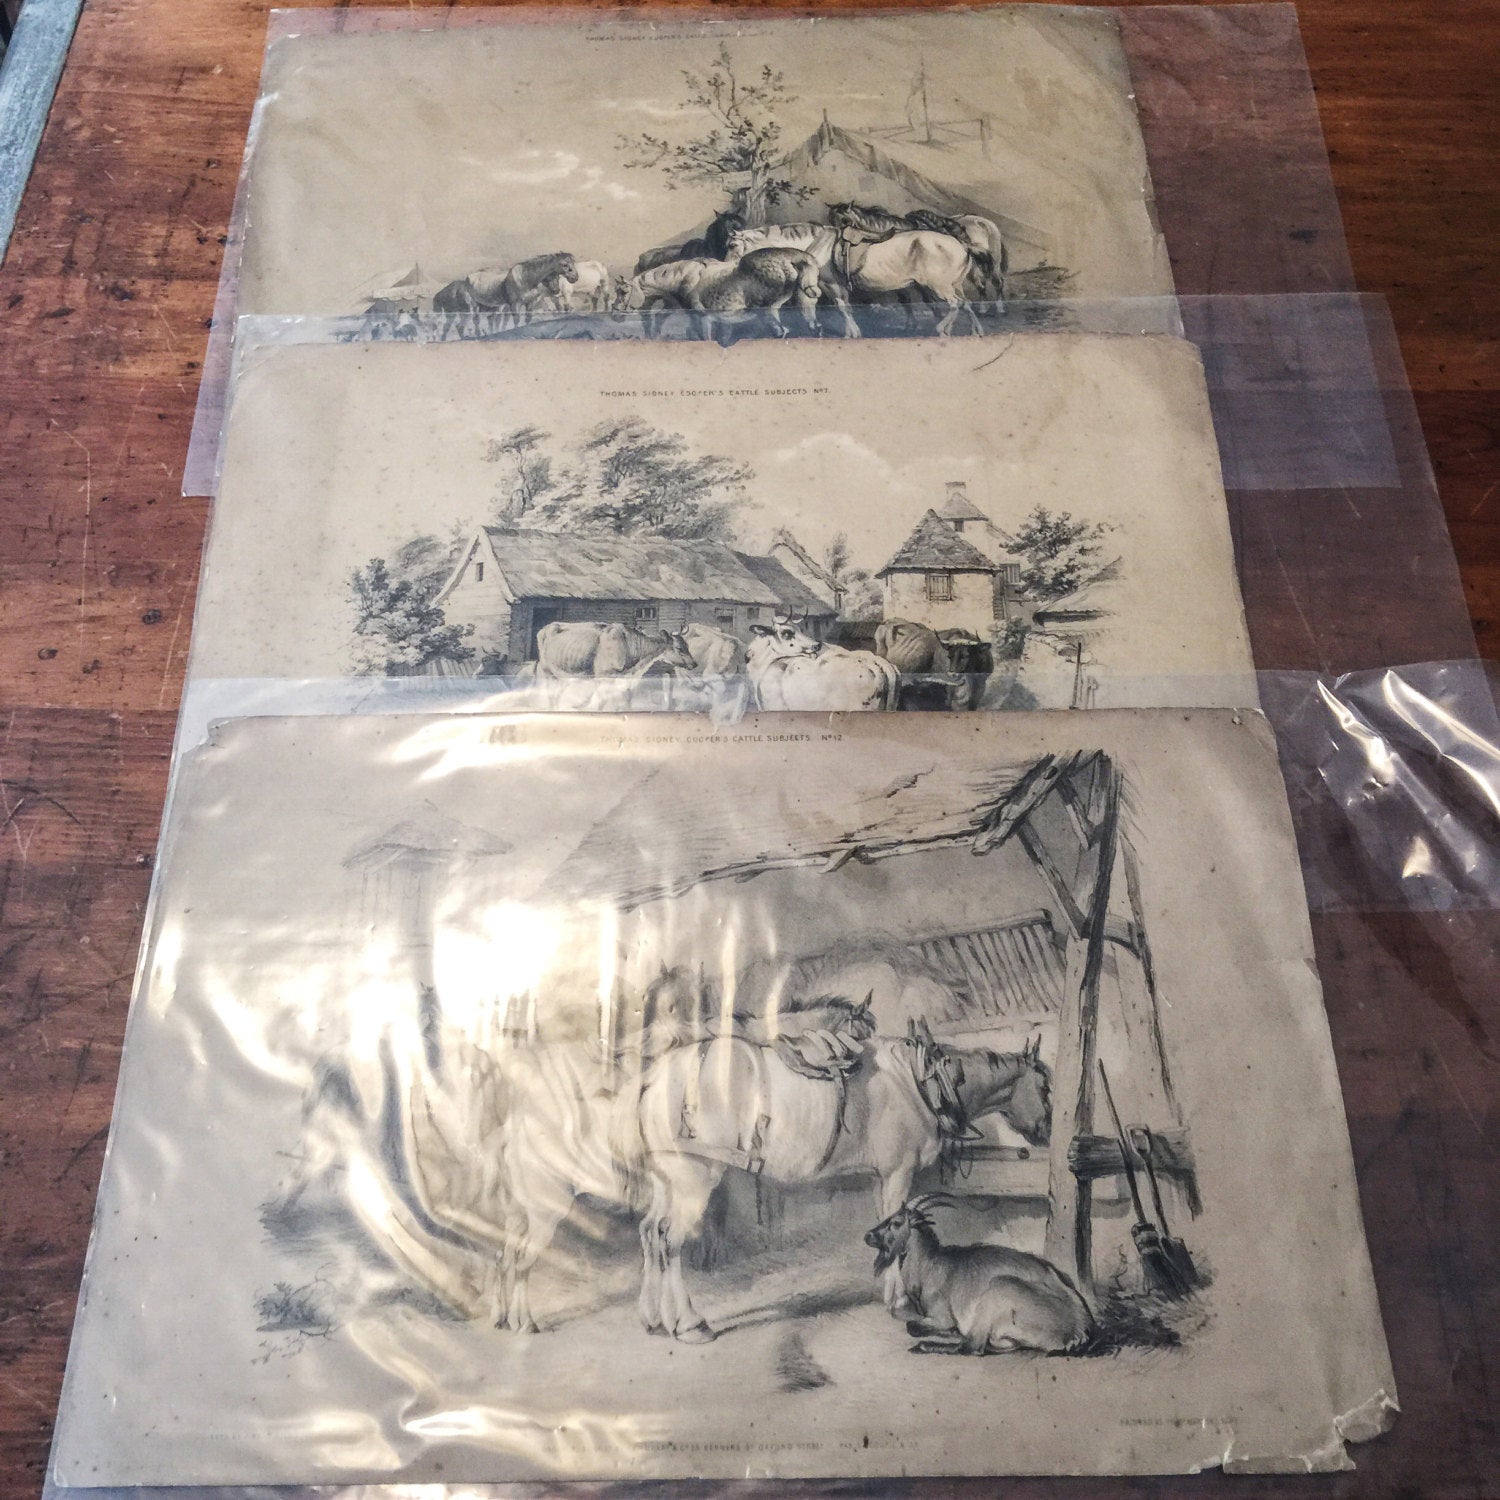 Thomas Sidney Cooper Lithographs (3) - Cattle Subjects - 1845 - J. West Giles - London - Rare - British Lithographs - British Prints